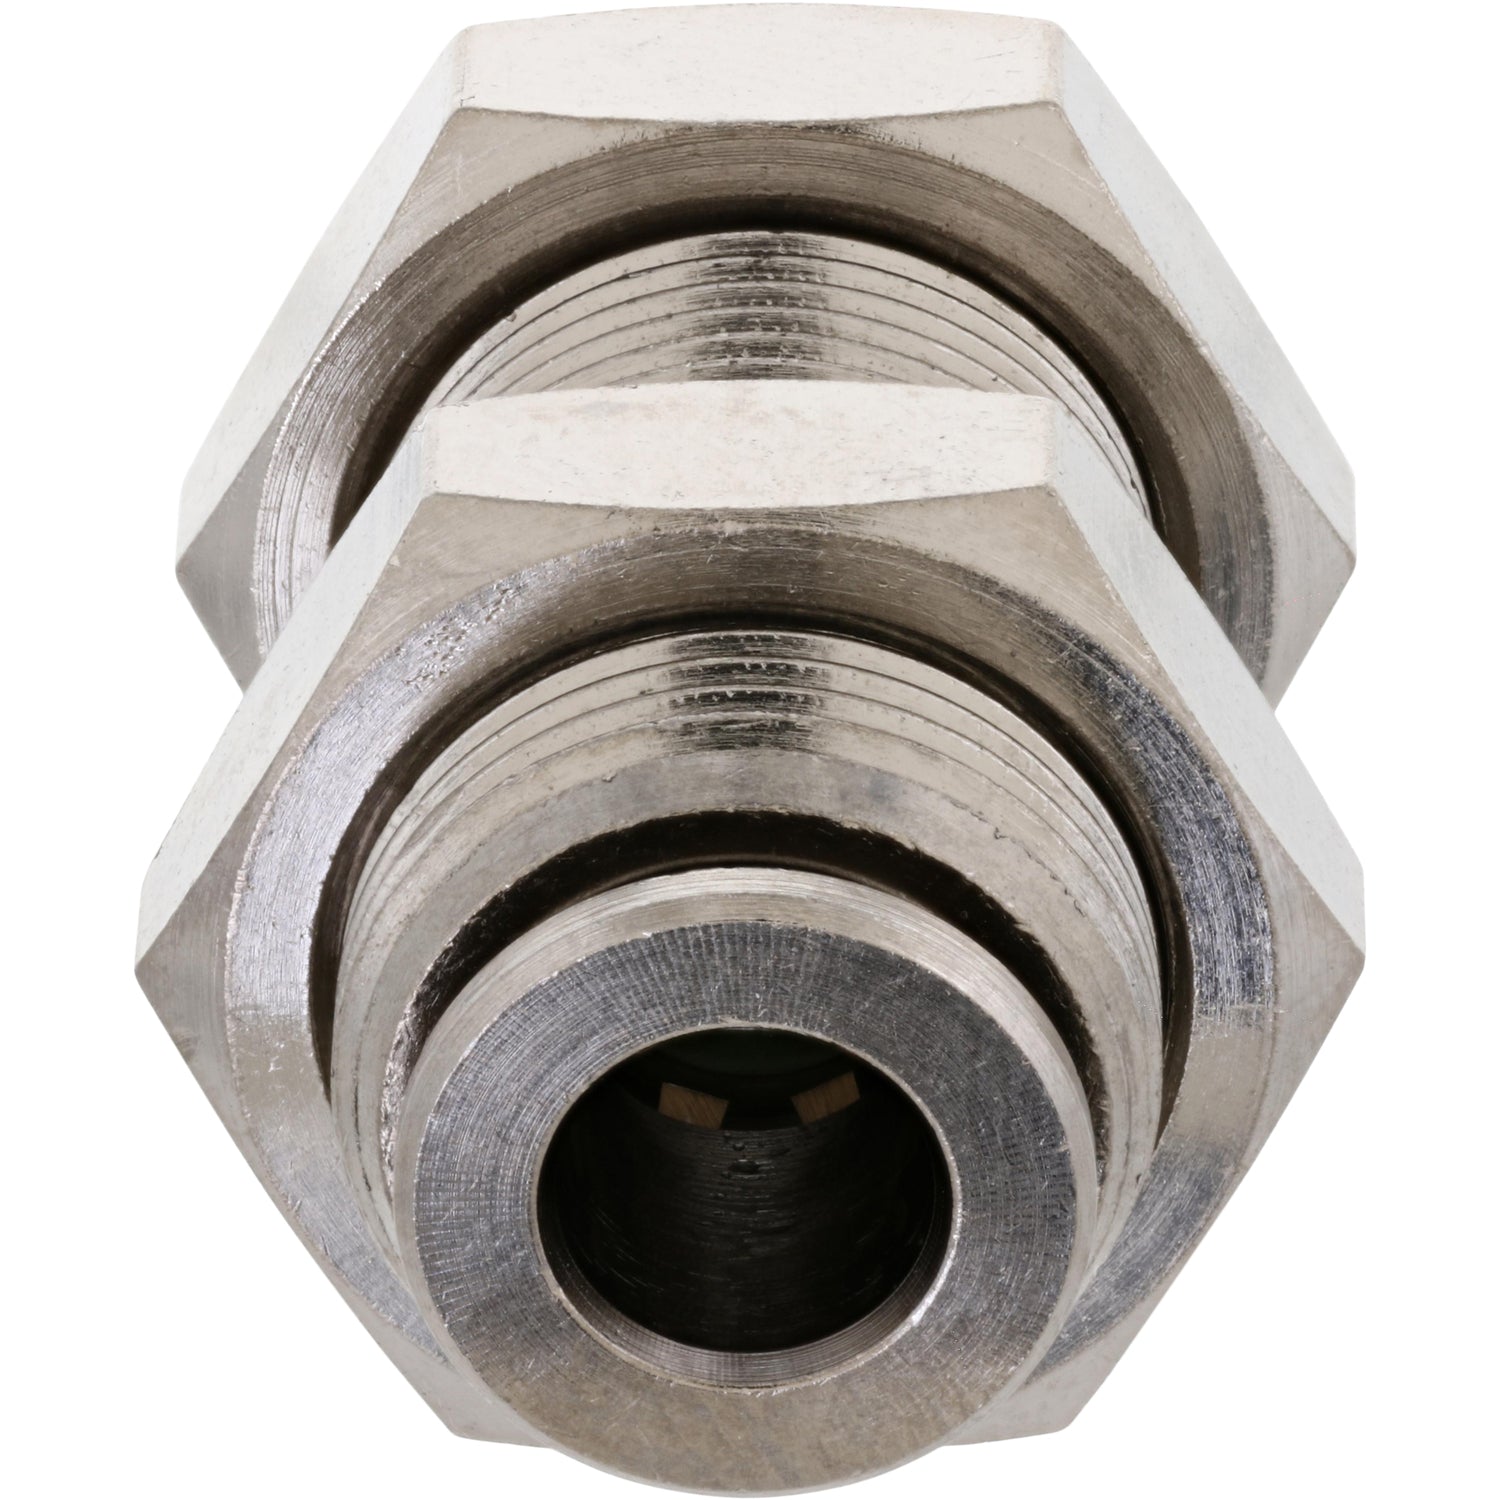 Threaded nickel-plated brass push-in bulkhead connector on white background. 